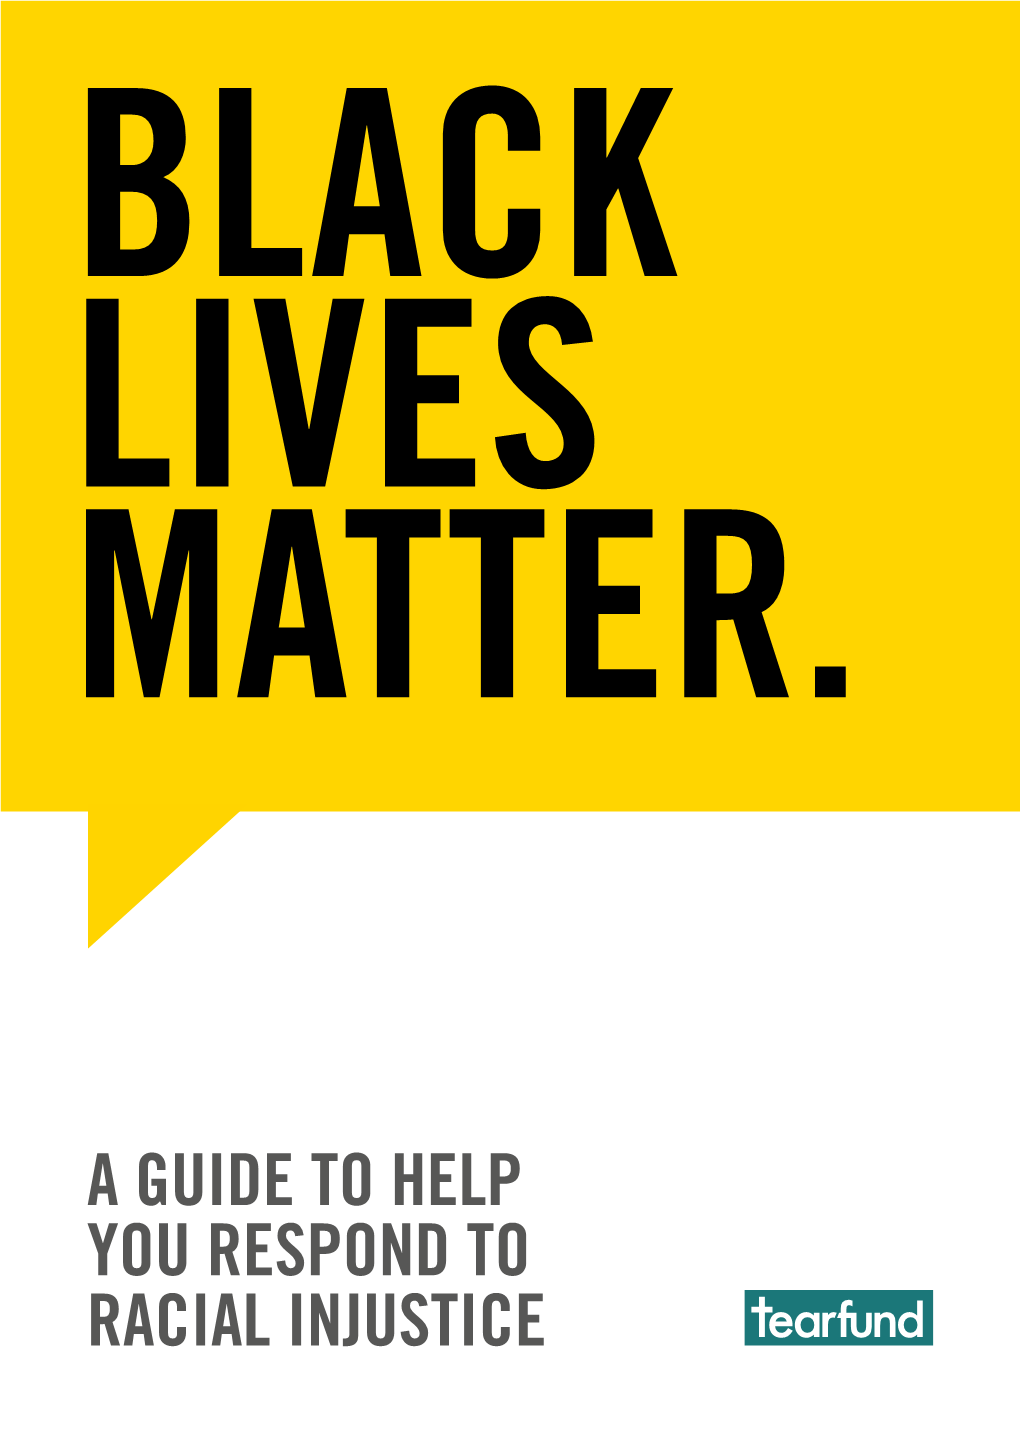 A Guide to Help You Respond to Racial Injustice Black Lives Matter Movement Response Guide 2/24